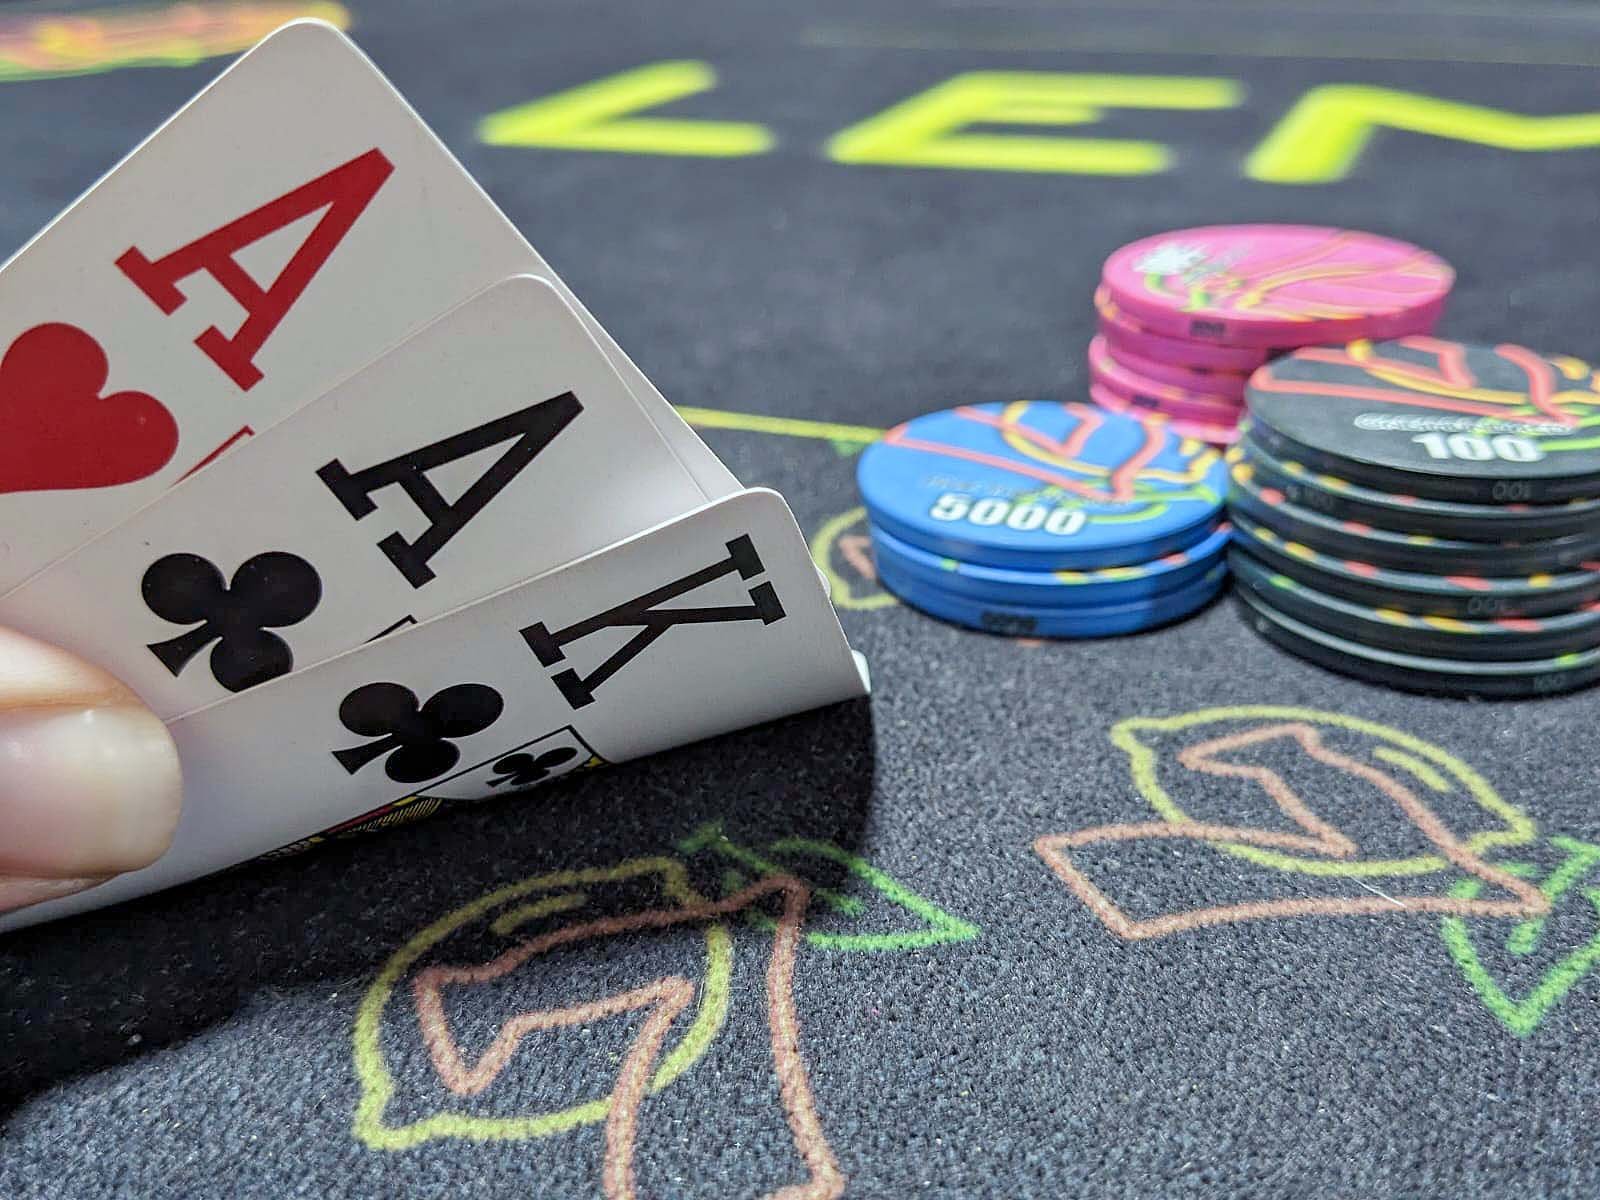 What is Crazy Pineapple poker and how do you play it? — Lemons